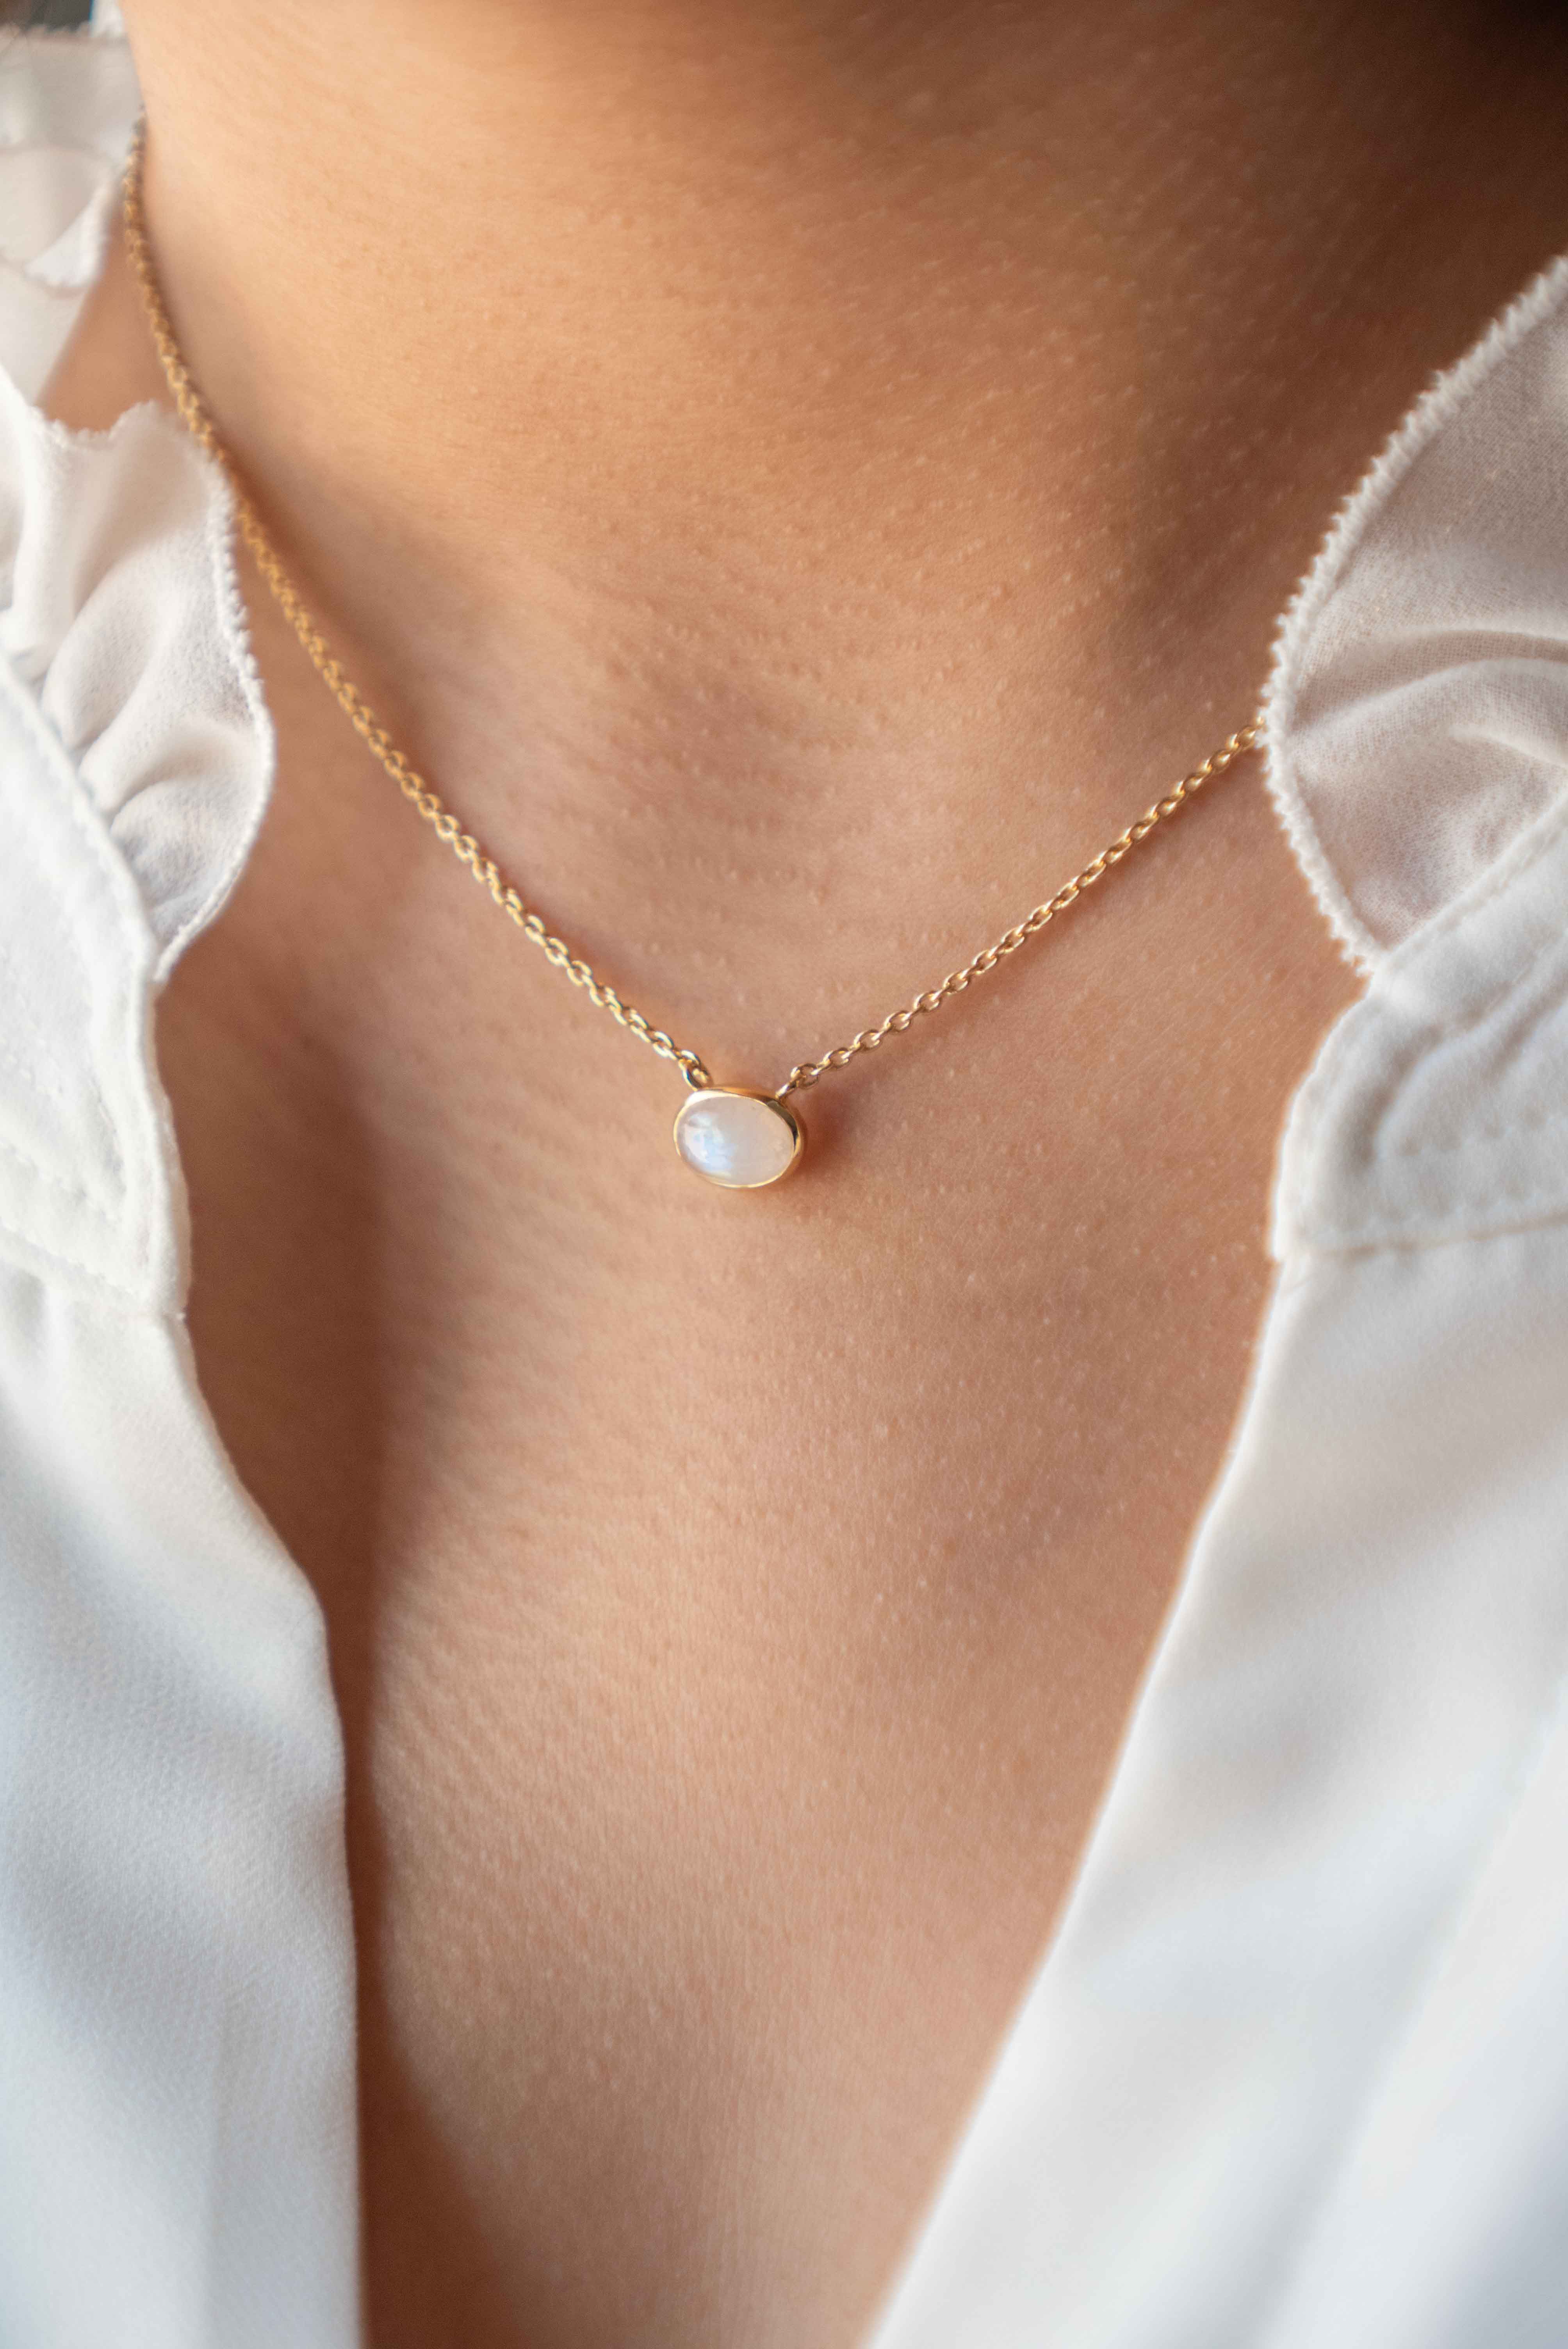 Moonstone Necklace Gold Filled, Natural Moonstone Jewelry Gift for Girls, Necklace for Women